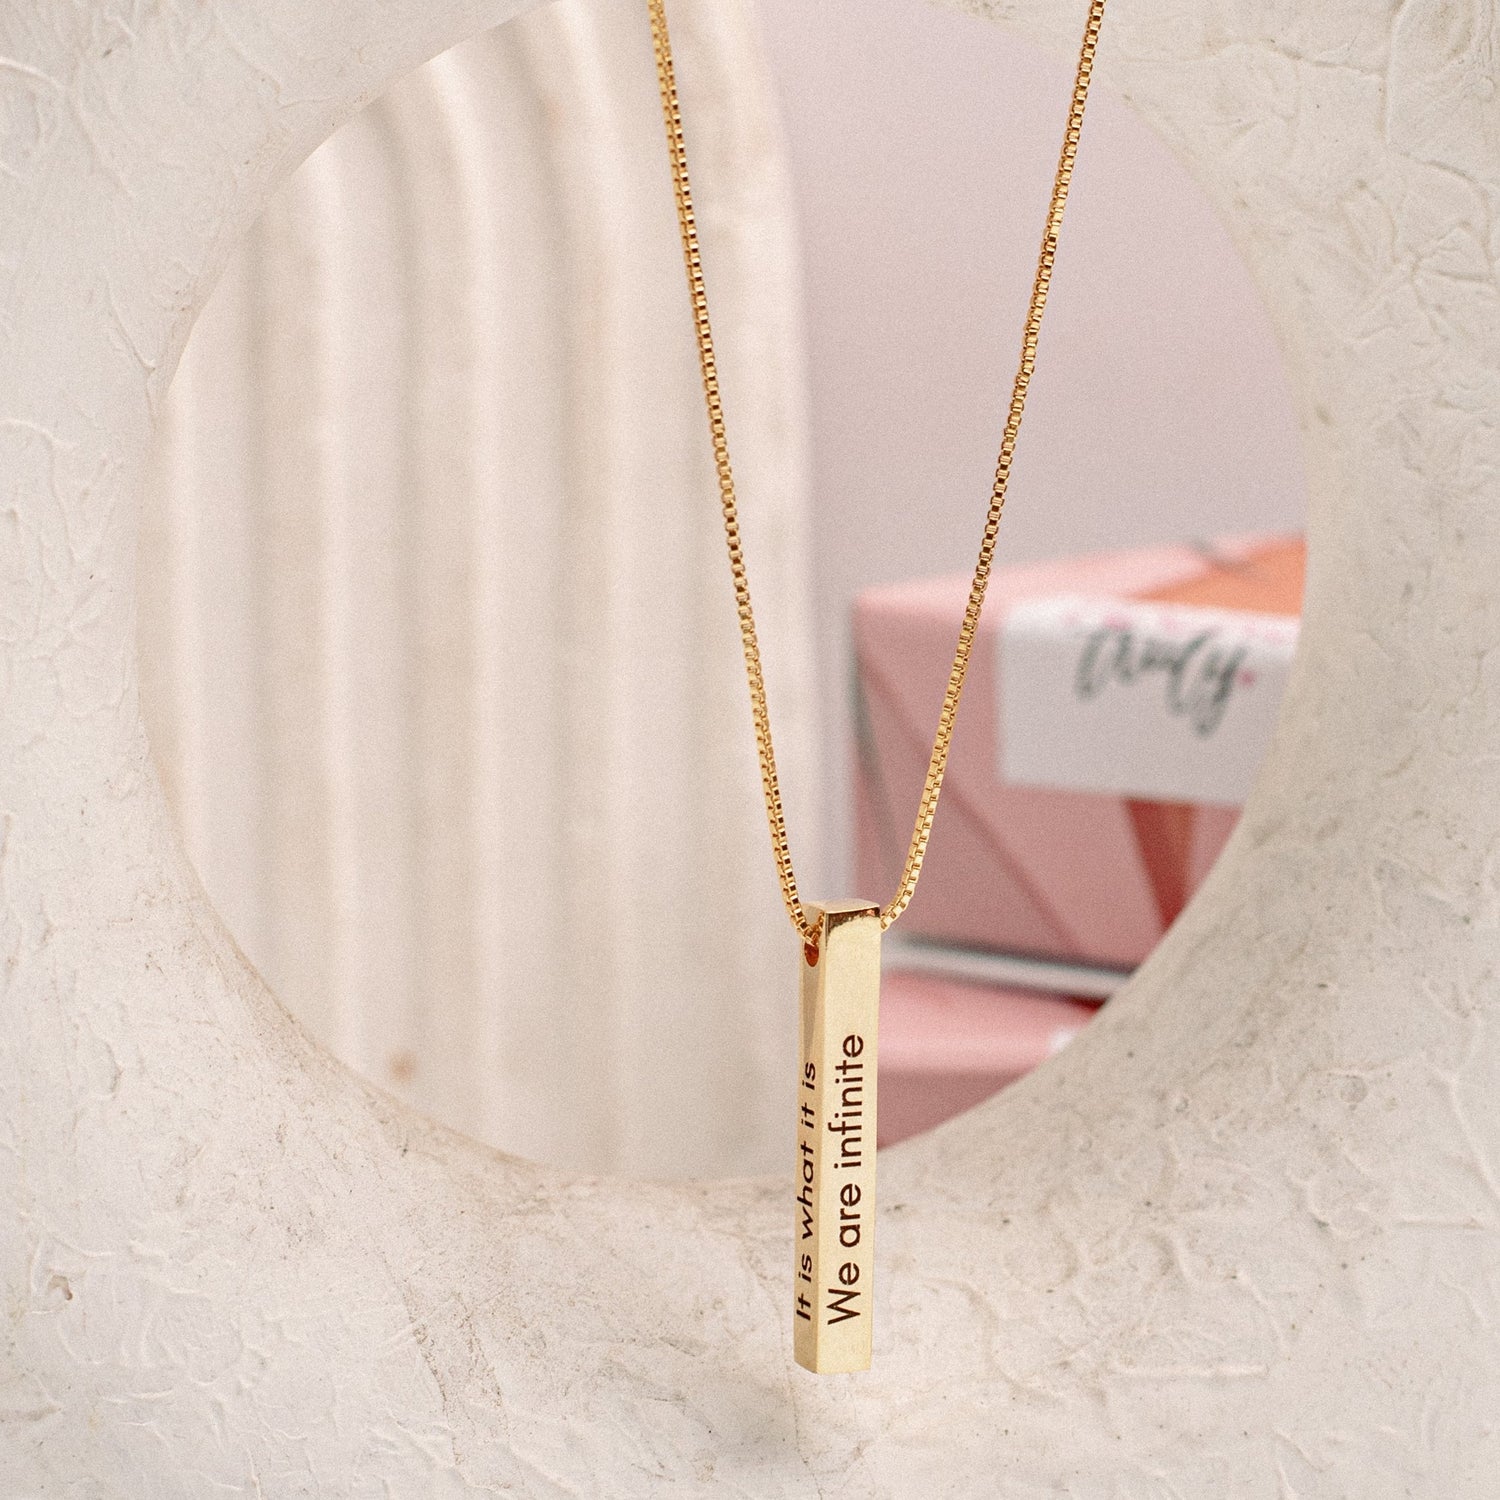 Yours Truly 22K Plated Cuboid Memory Bar Necklace